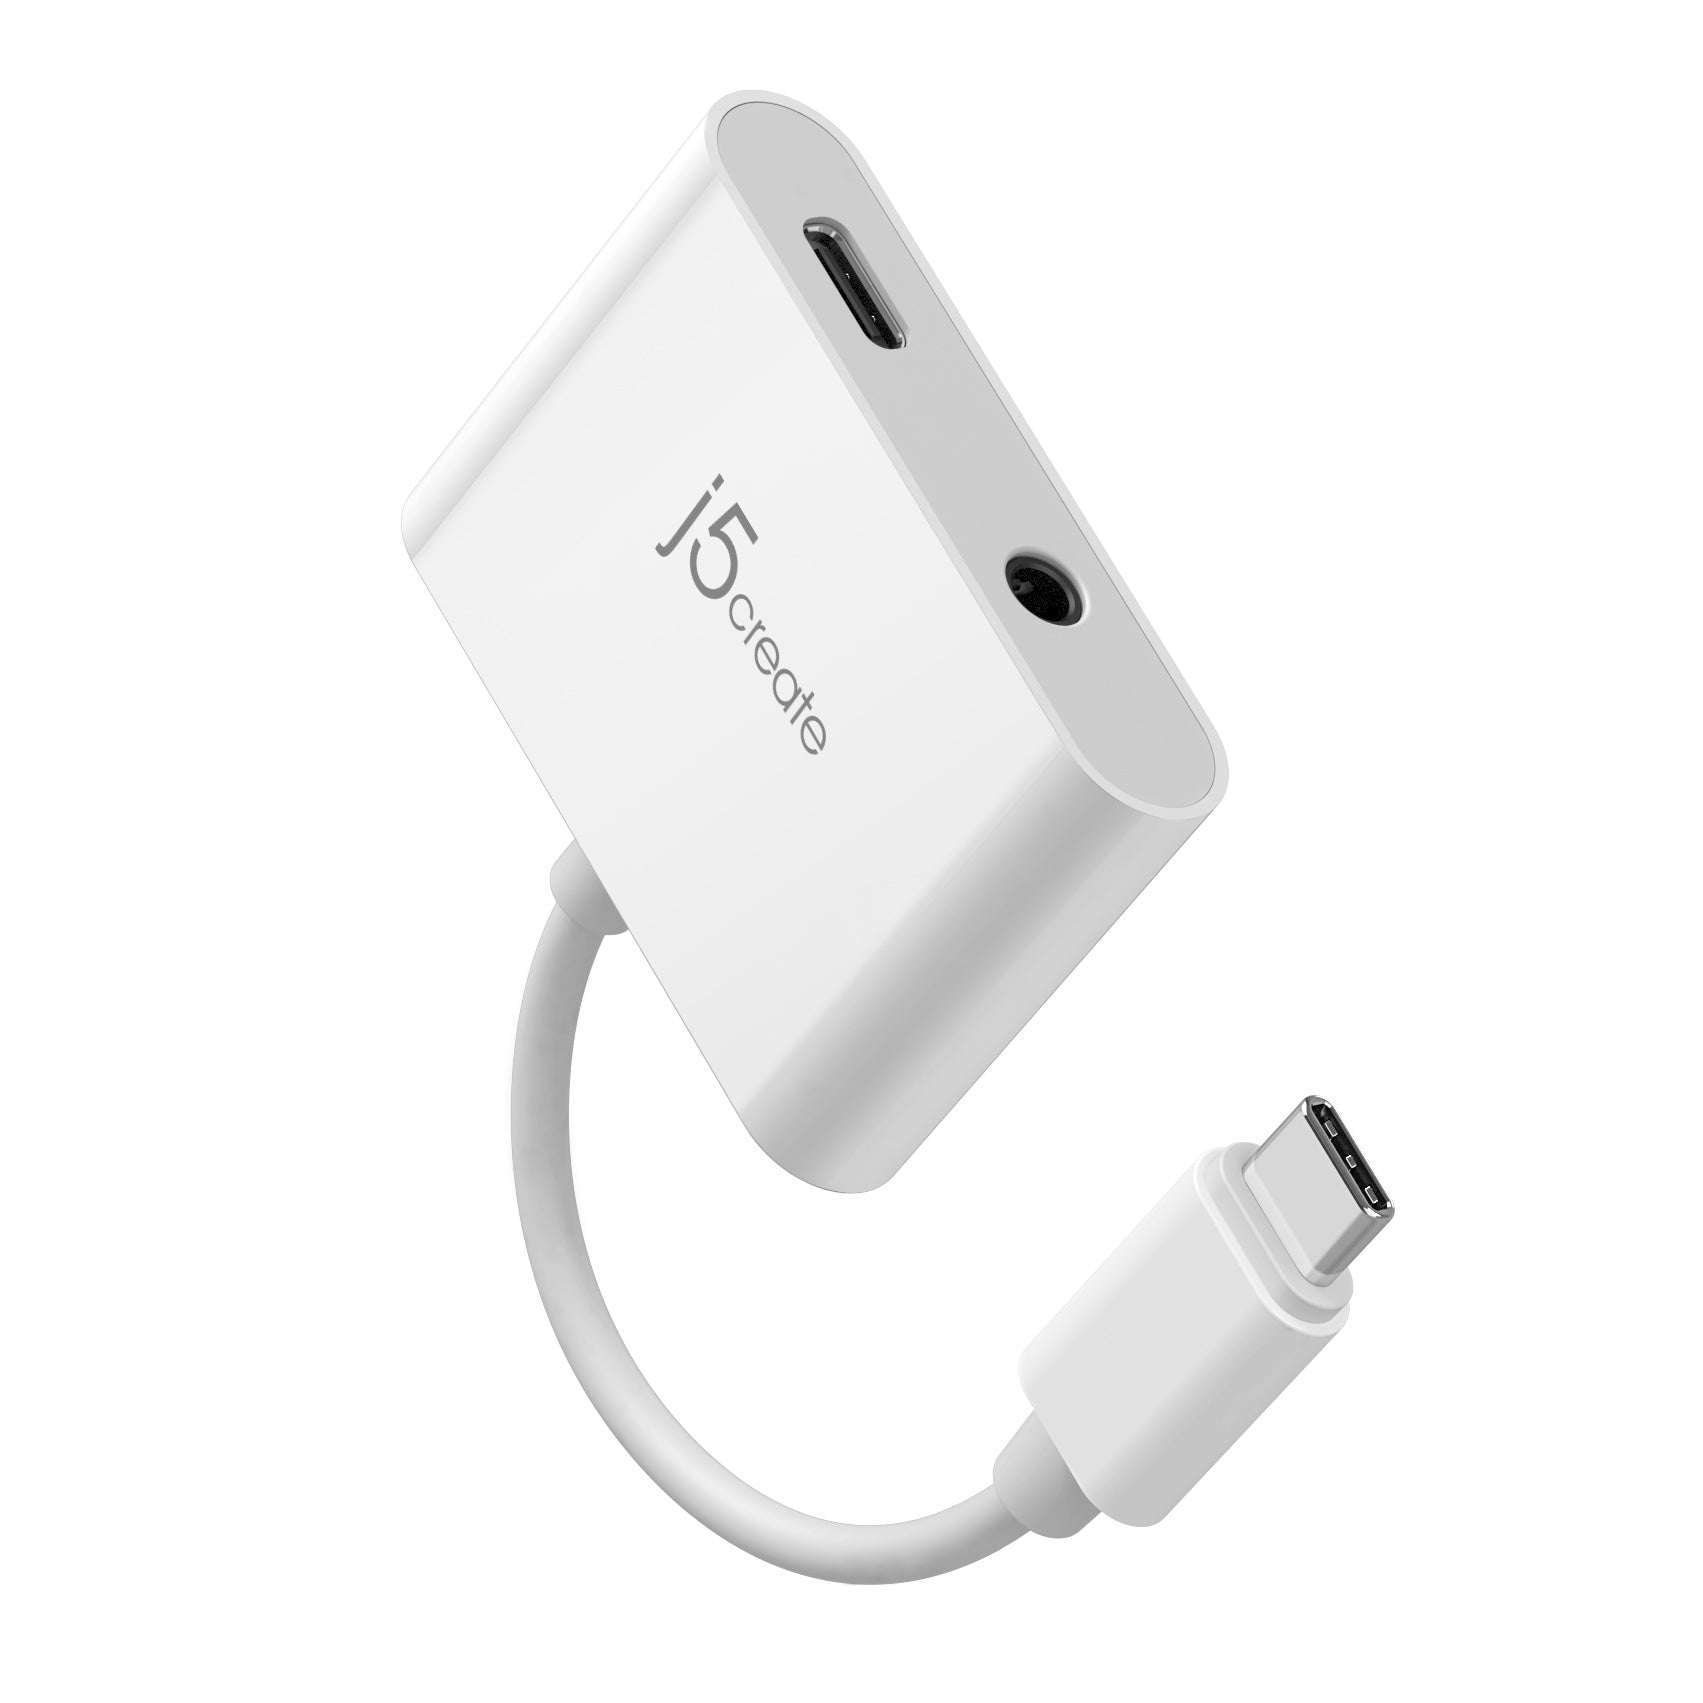 USB-C® to 3.5mm Audio Adapter with Power Delivery – j5create